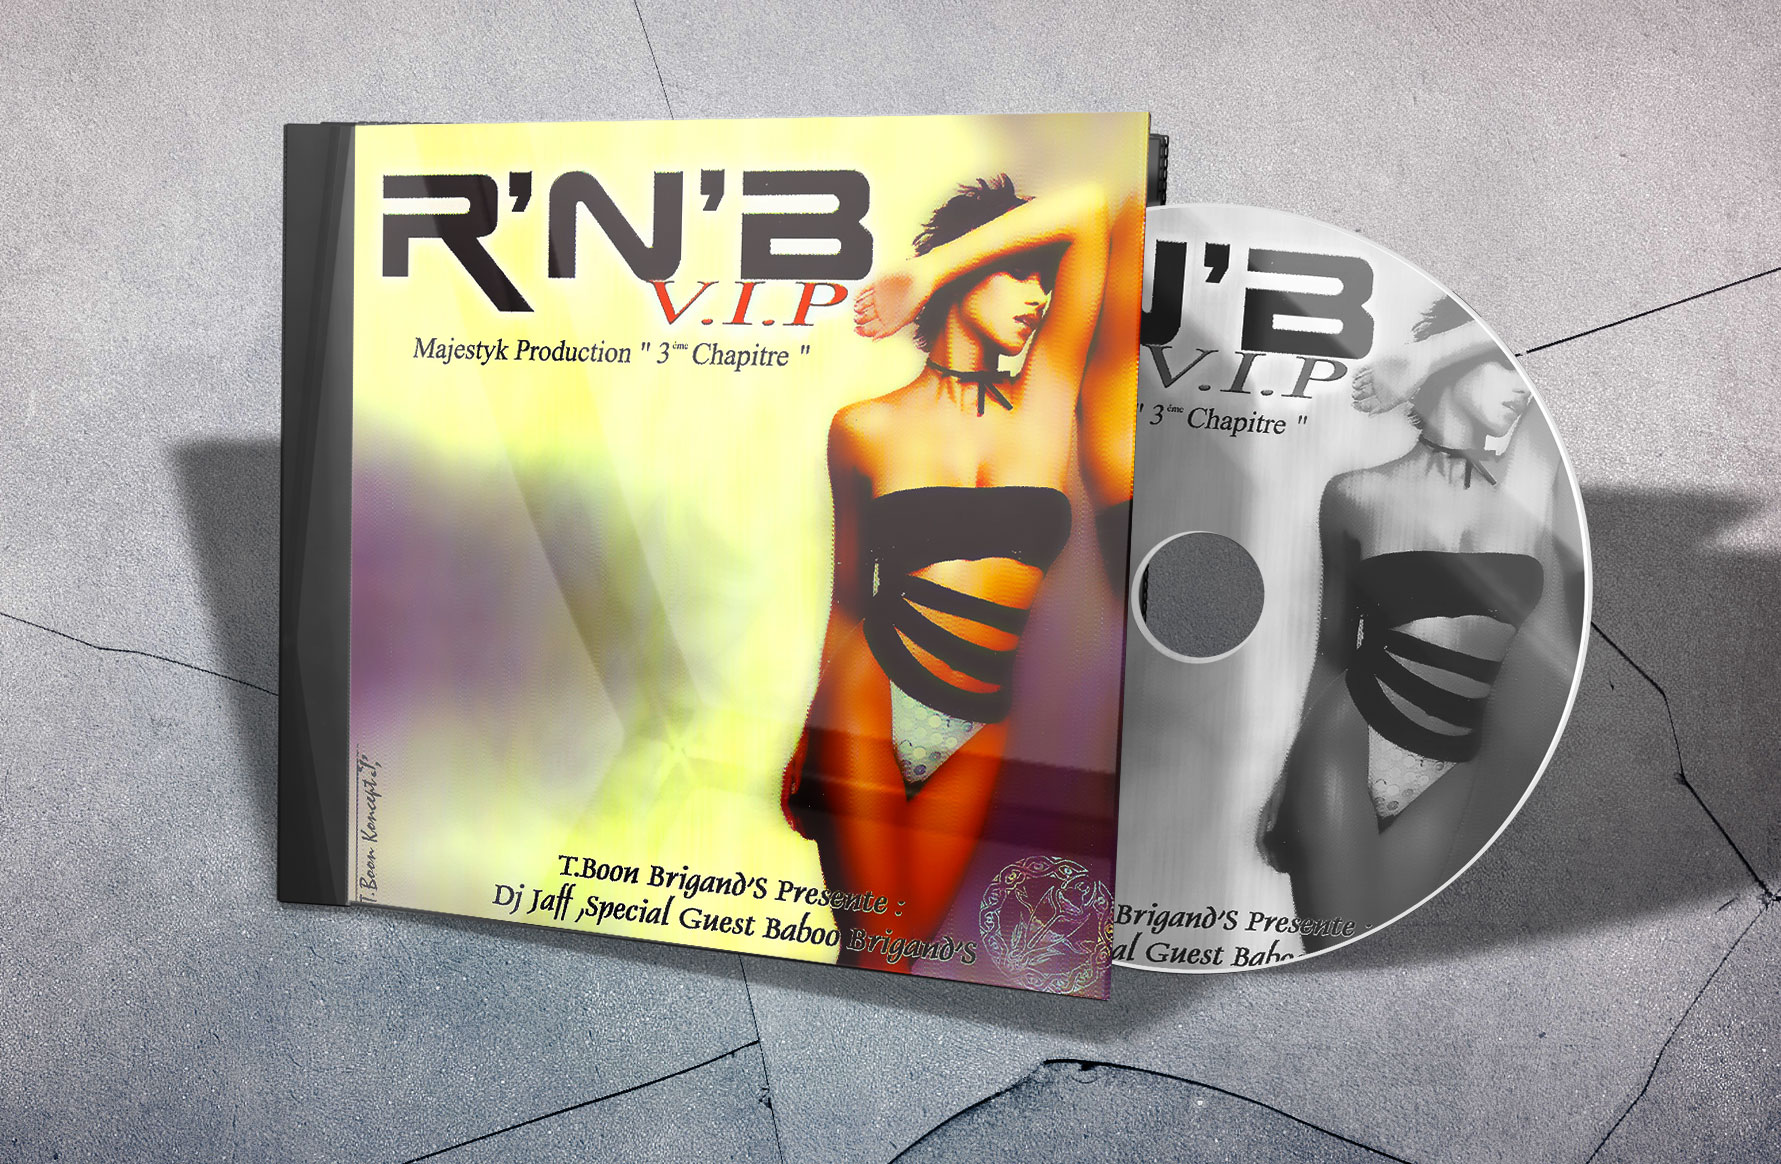 RnB VIP by T.Boon Brigands'S